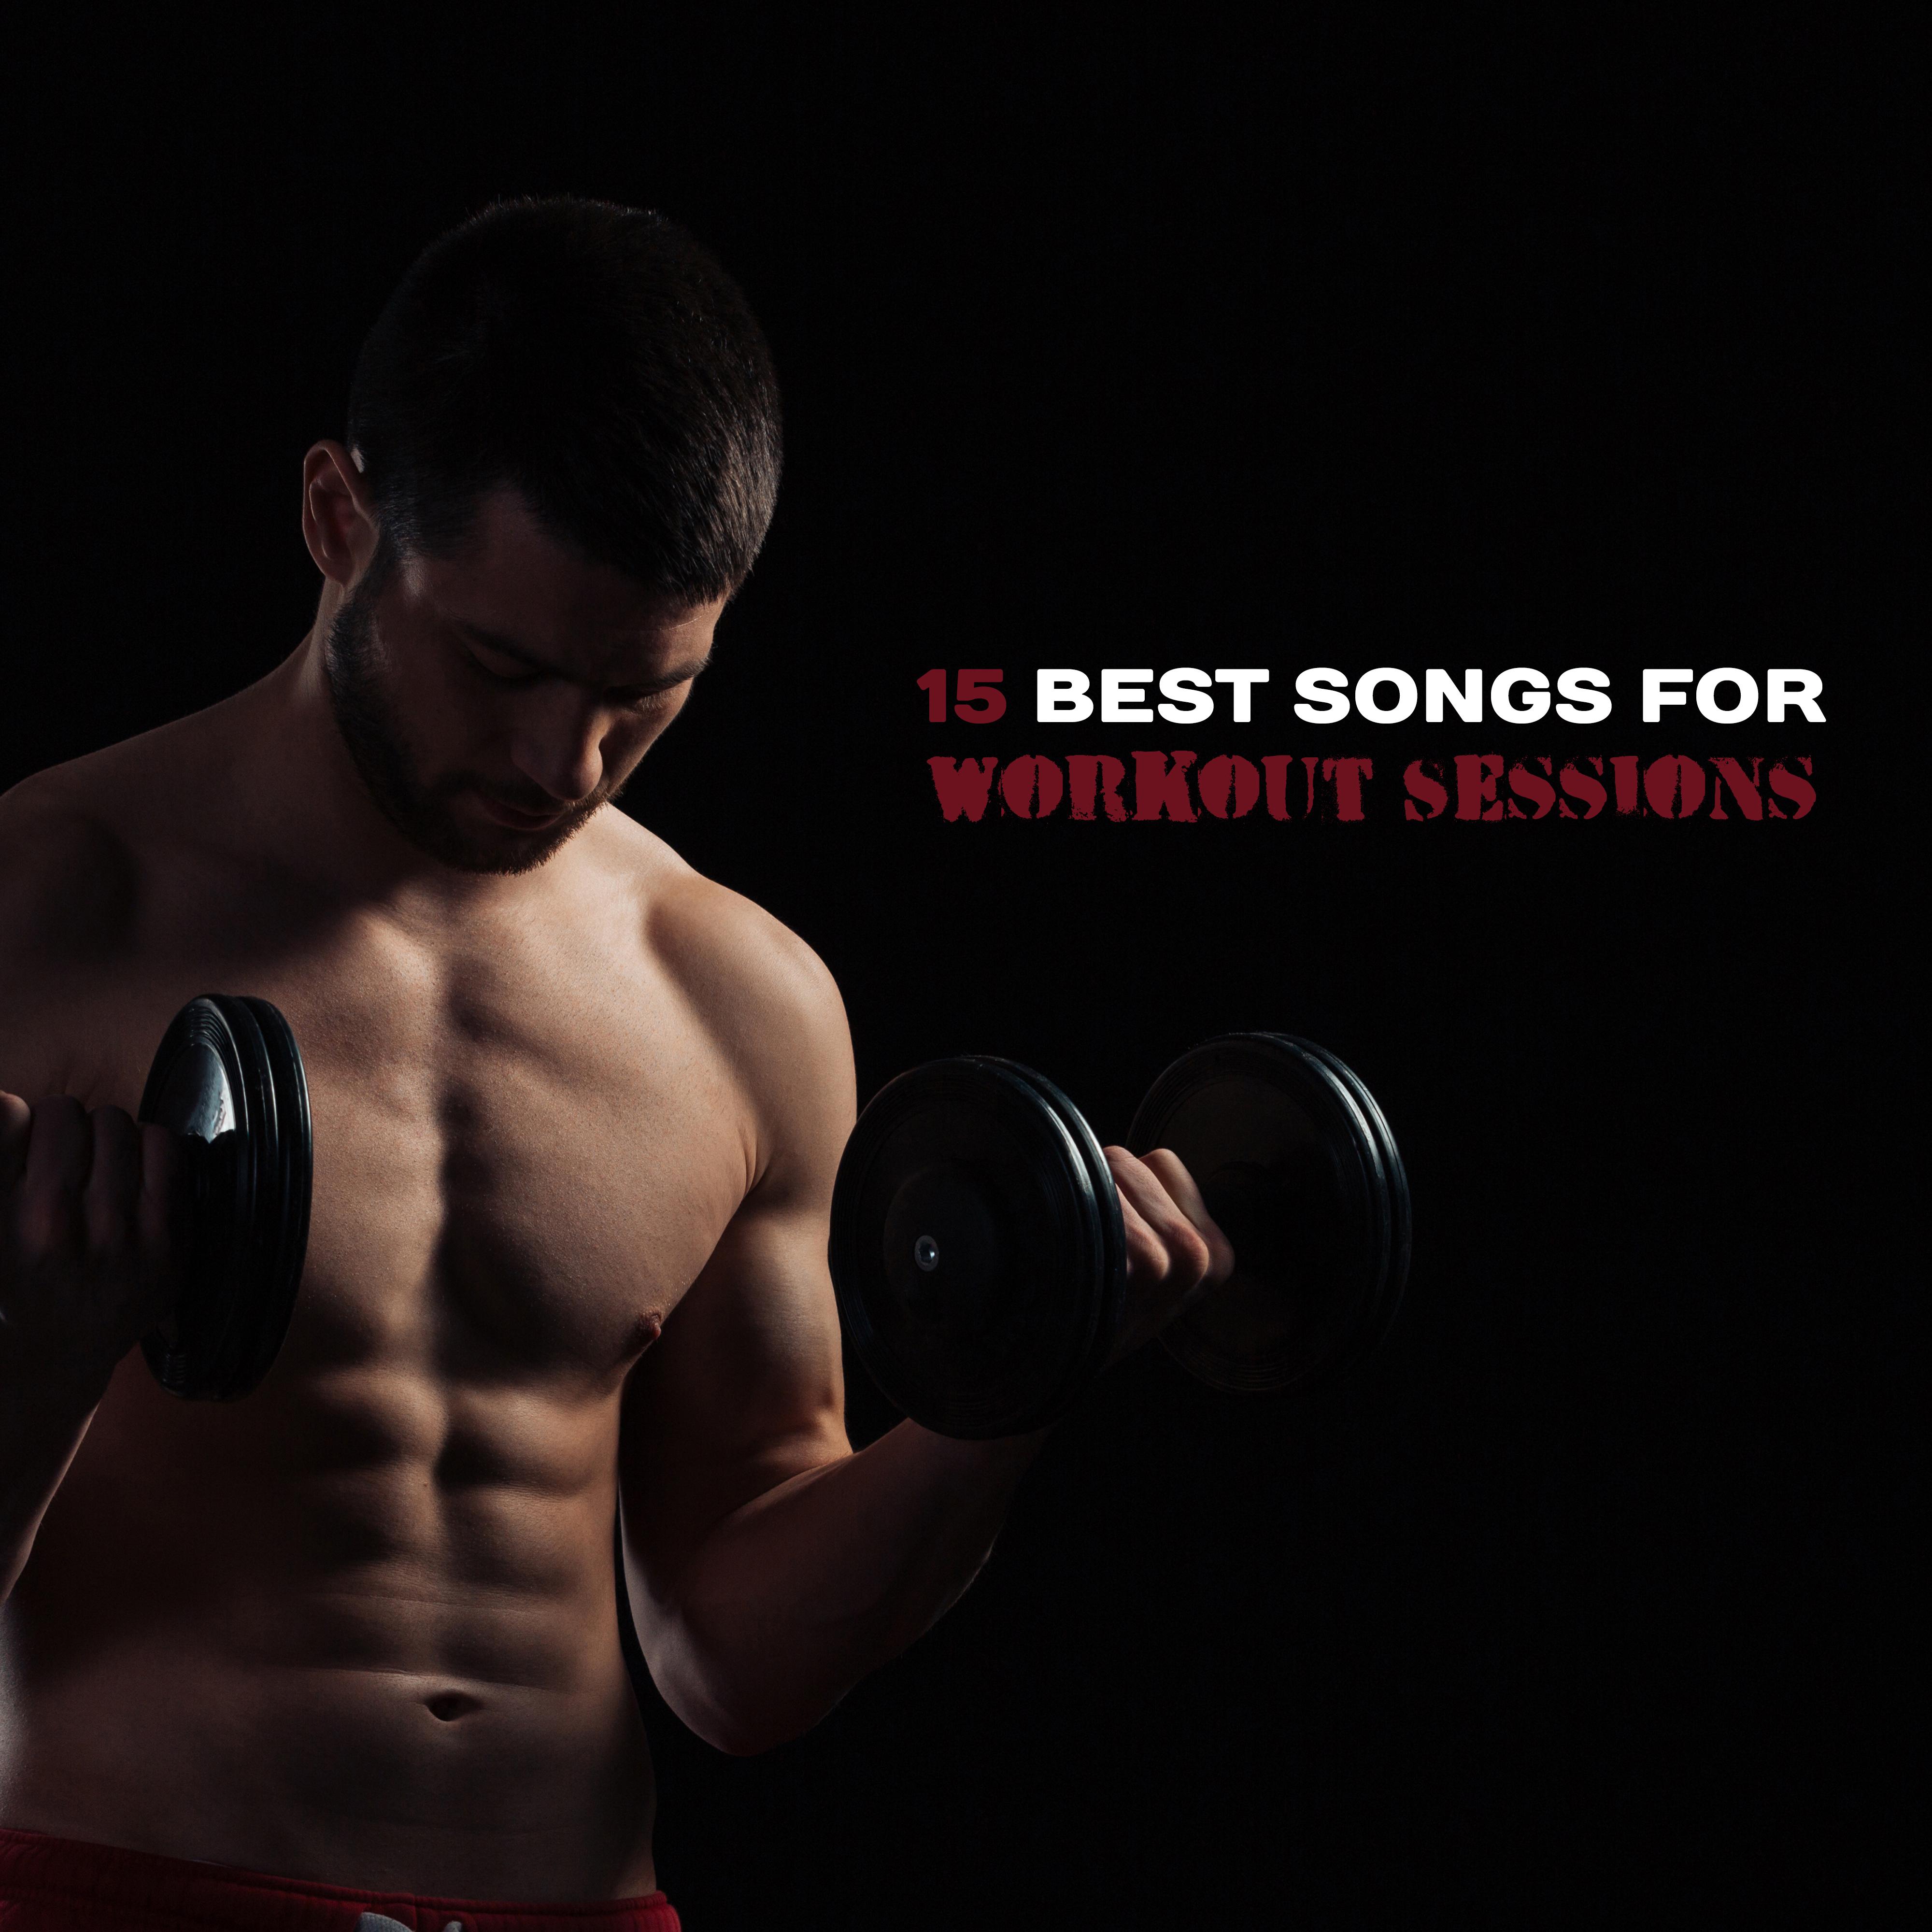 15 Best Songs for Workout Sessions – Music for Stretching Out, Pilates Workout, Training Yoga, Relax for Body